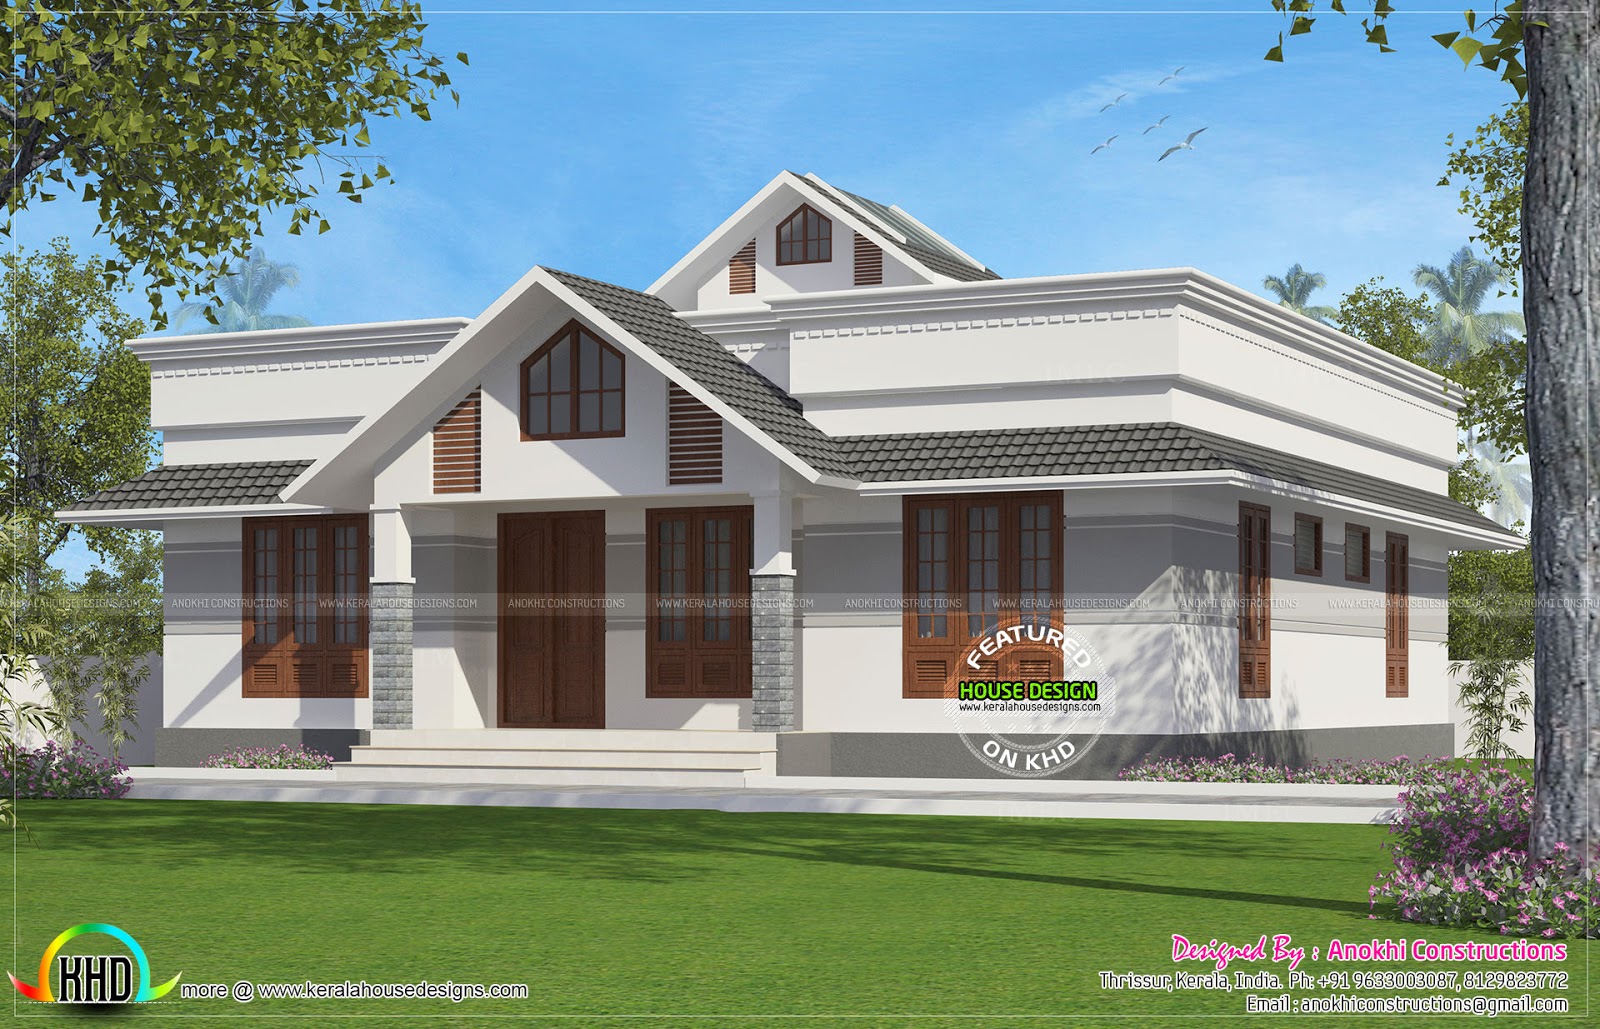 1330 Square Feet Small House Plan Kerala Home Design And Floor Plans